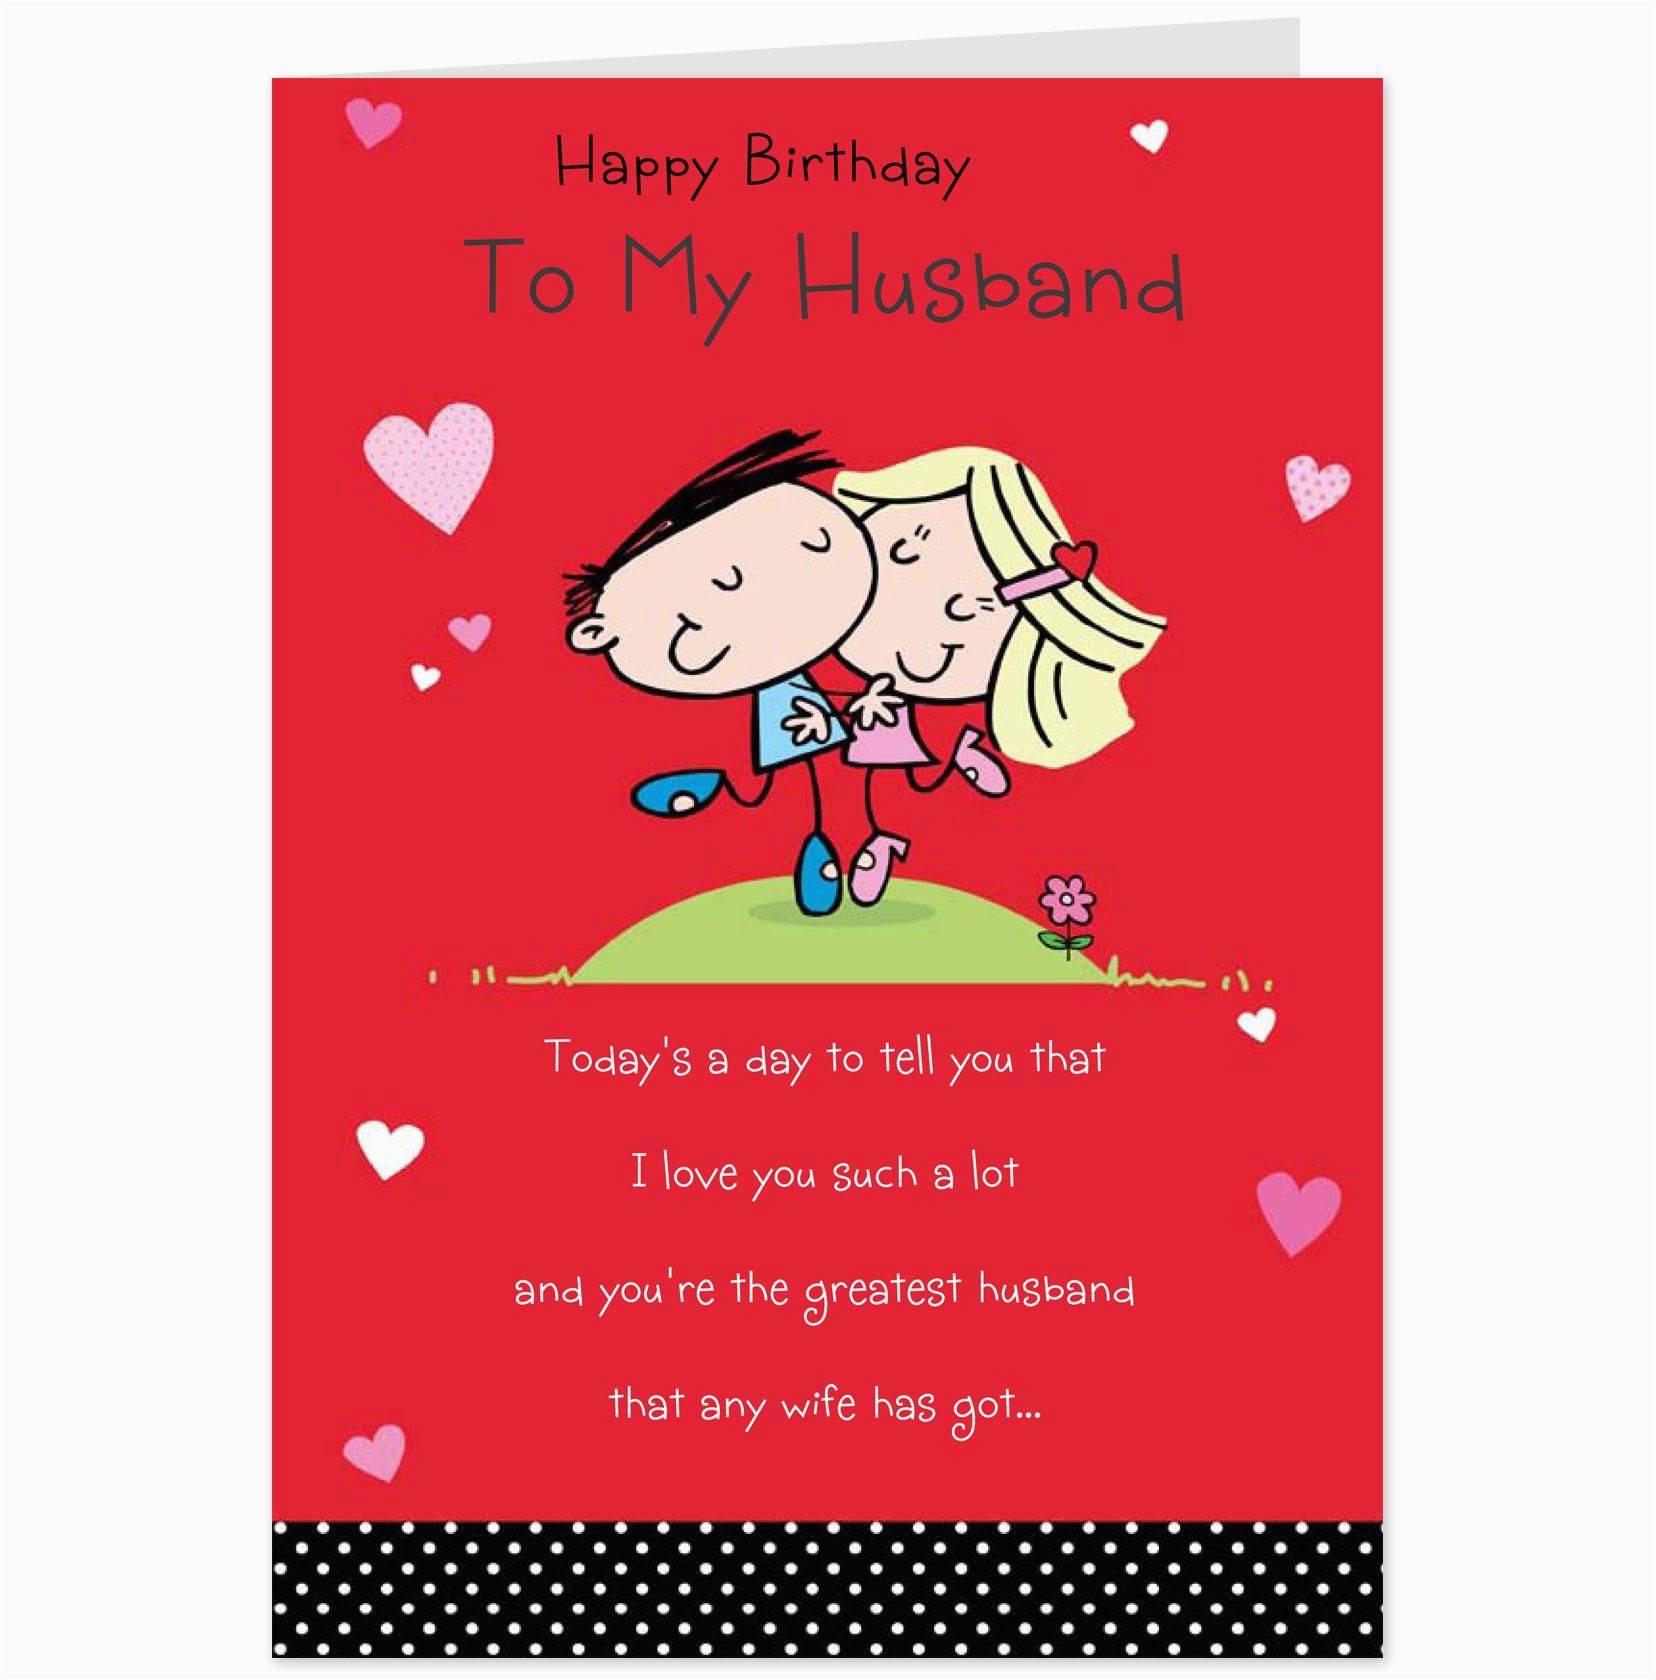 Free Funny Birthday Cards for Husband Birthday Invitations Card Romantic Birthday Wishes to